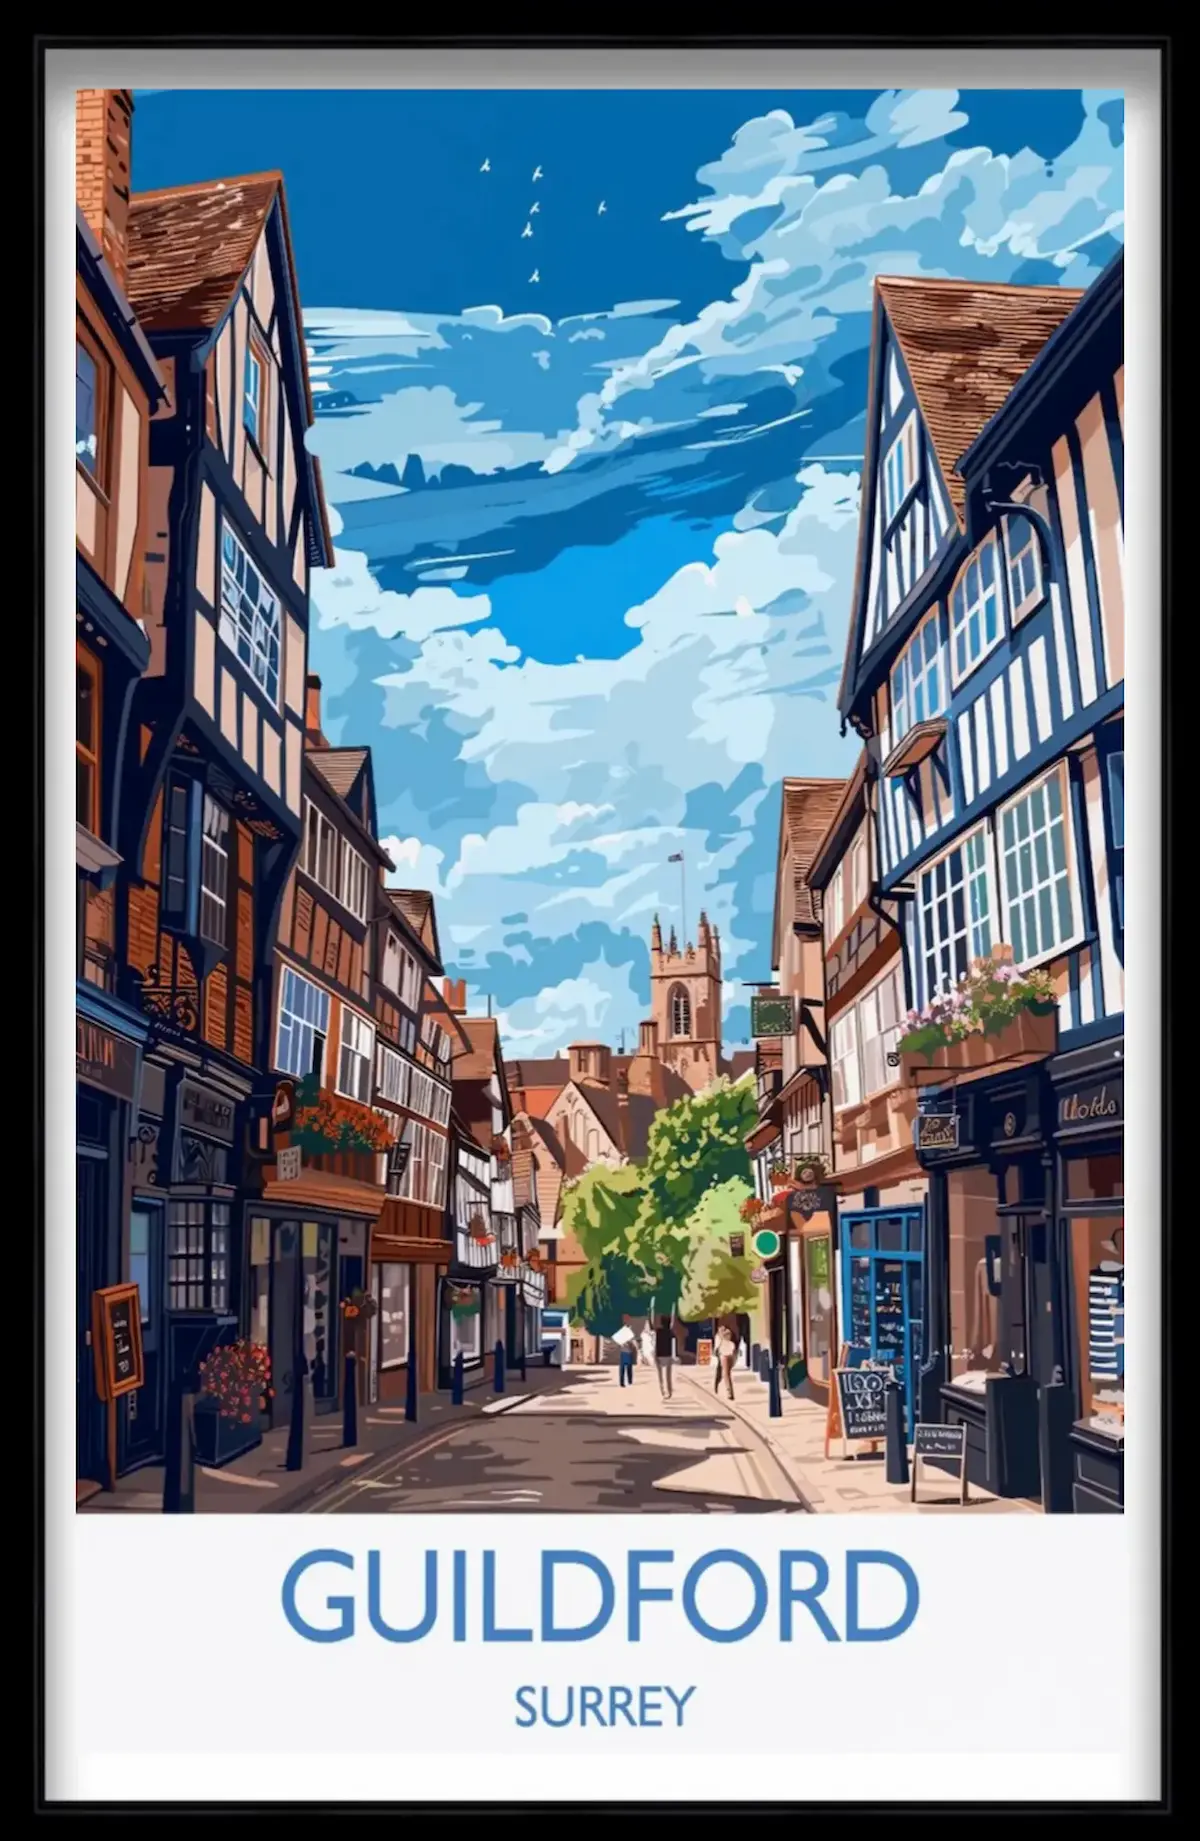 Artistic drawing of Guildford in Kent within a picture frame.